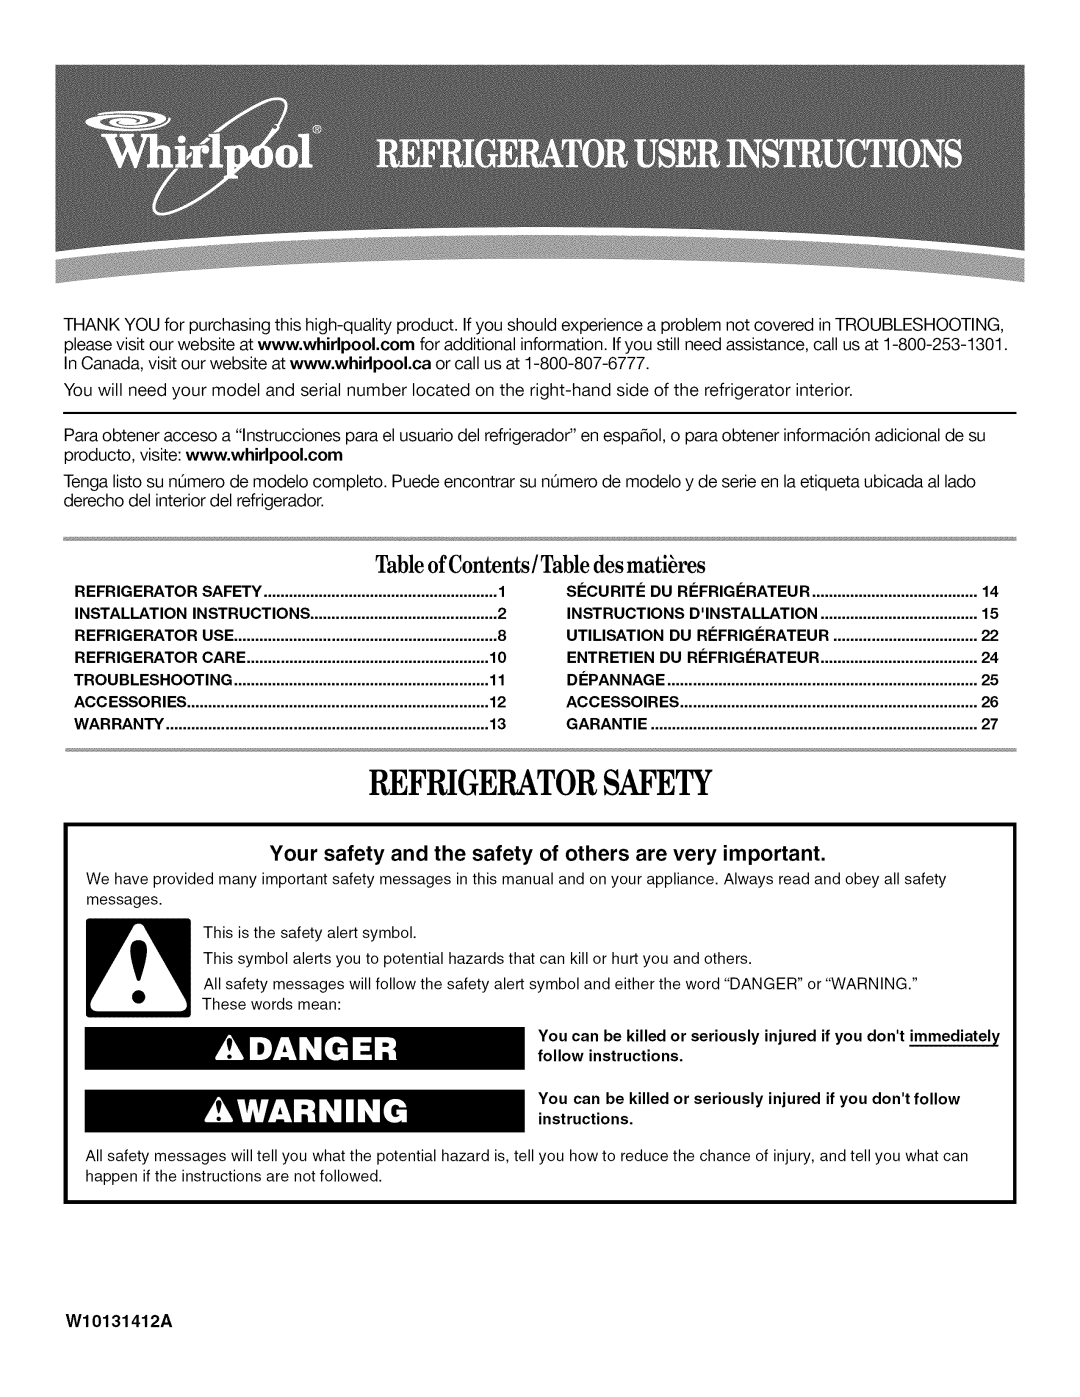 Whirlpool W10131412A installation instructions Refrigeratorsafety, Tableof Contents / Tabledes matibres 